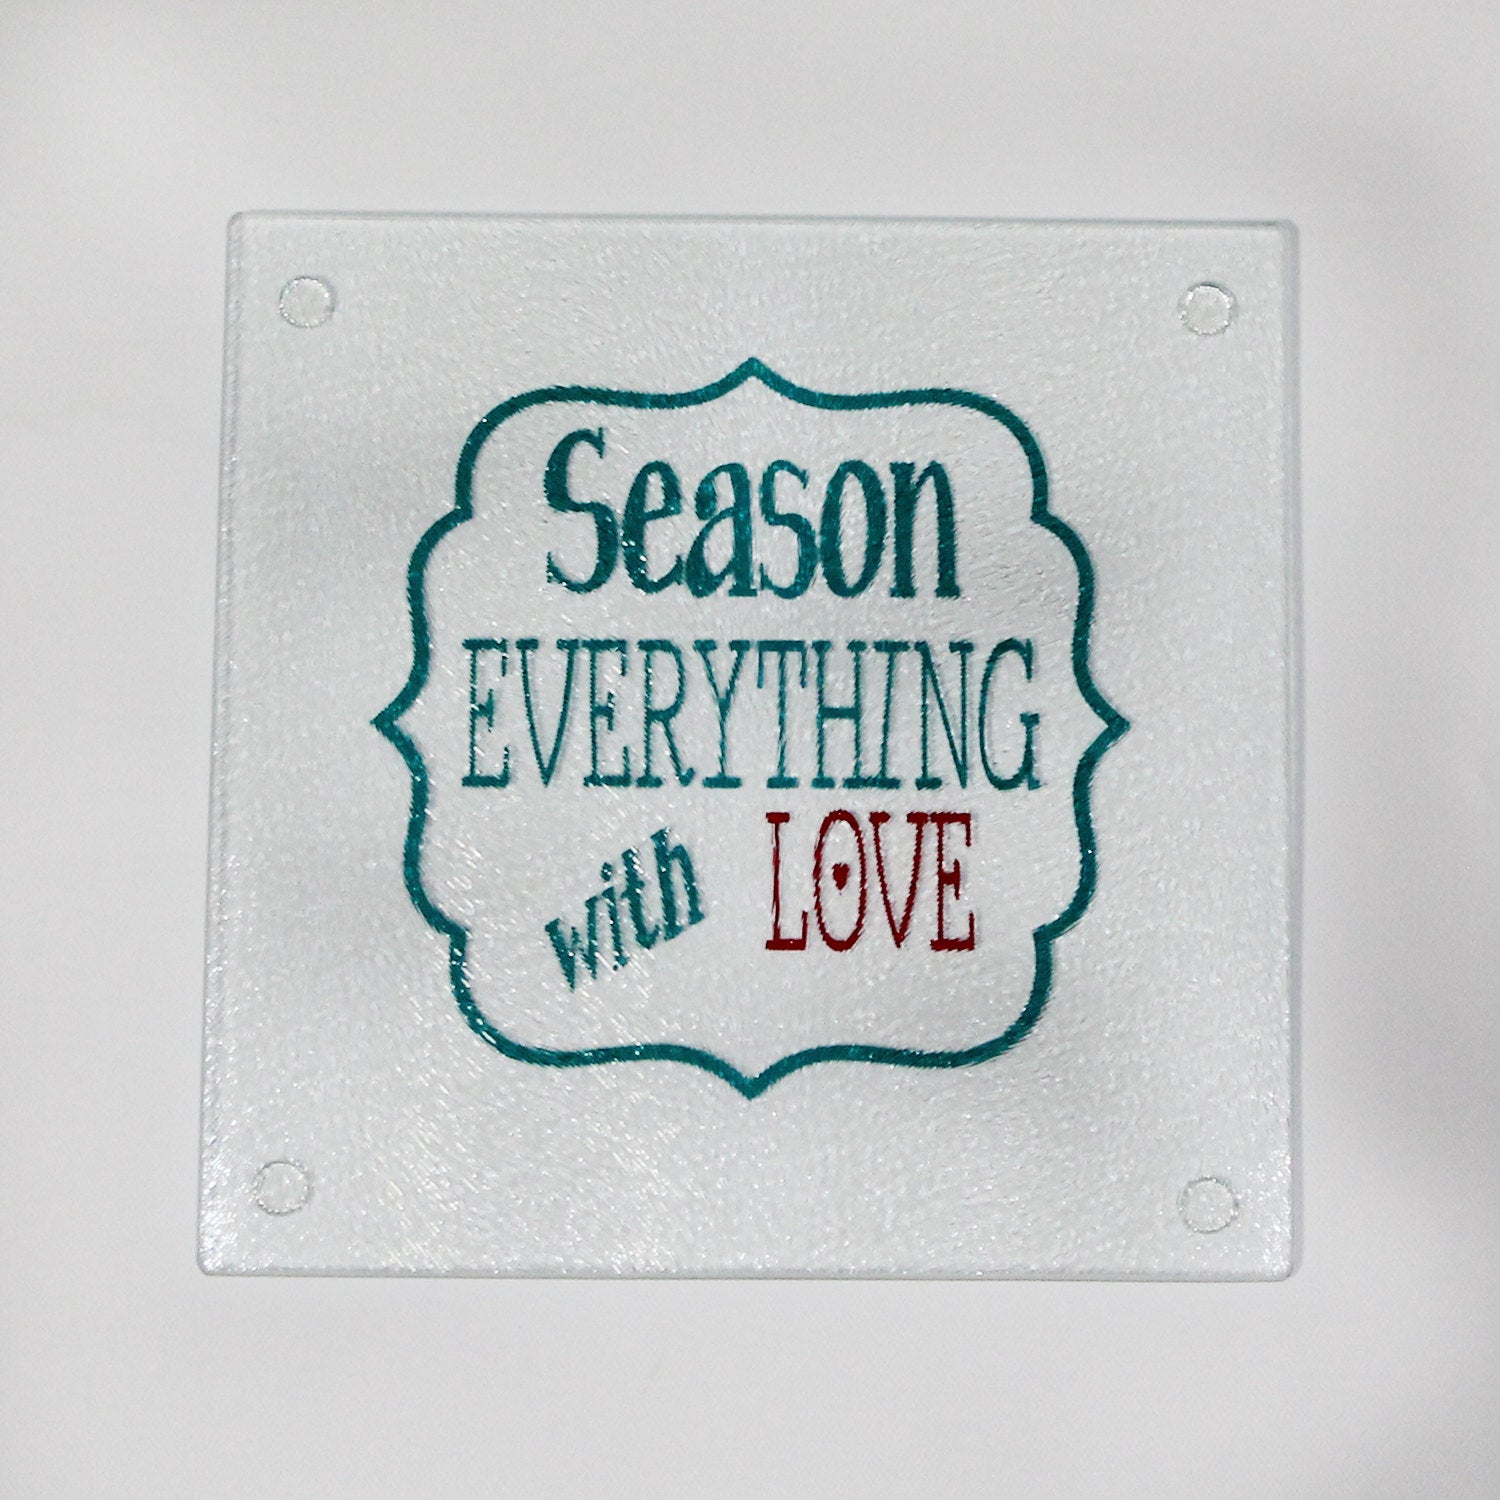 "Season Everything with Love" Cutting Board or Trivet - Kitchen - Birthday - Housewarming - Wedding - Couples - Anniversary - Gift